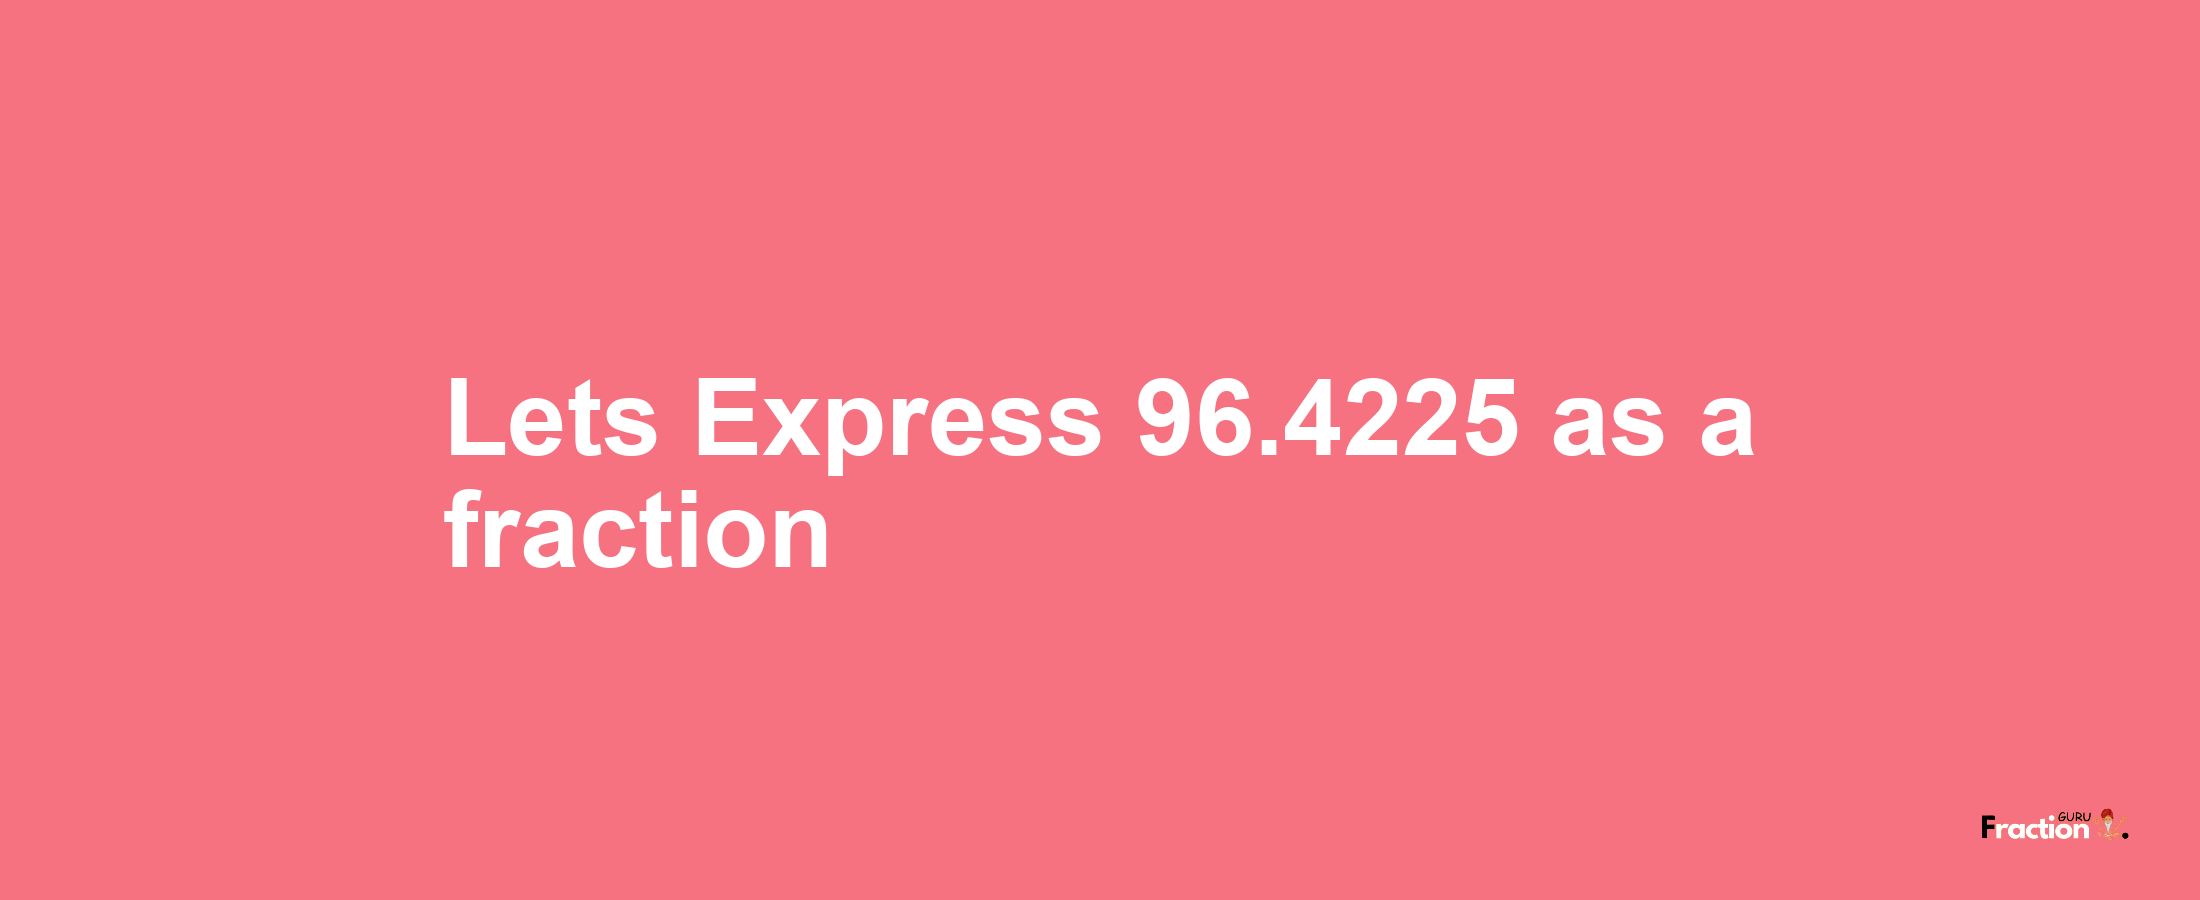 Lets Express 96.4225 as afraction